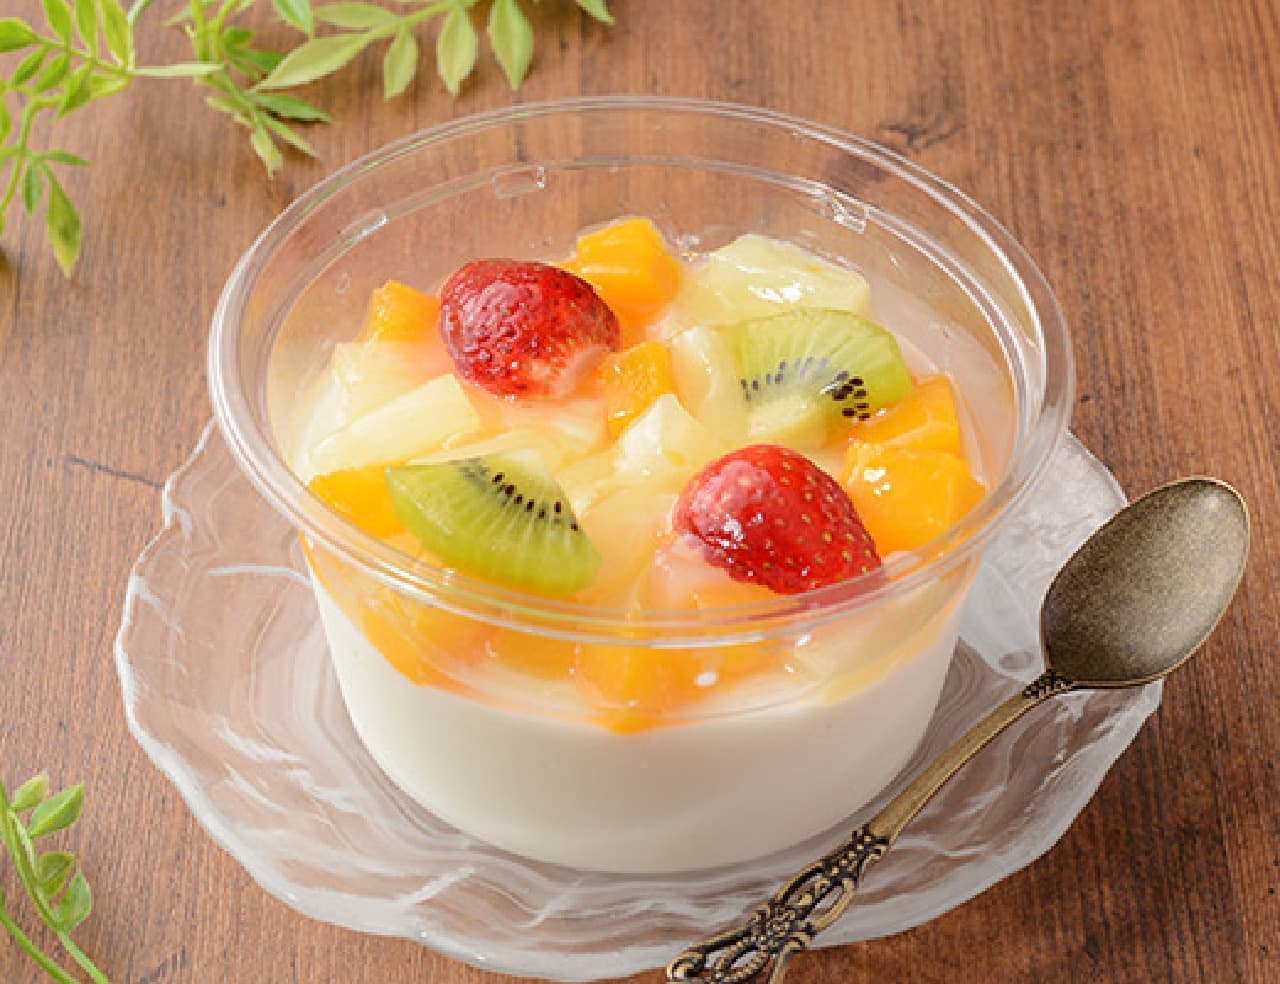 LAWSON "Large apricot bean curd (with fruit)